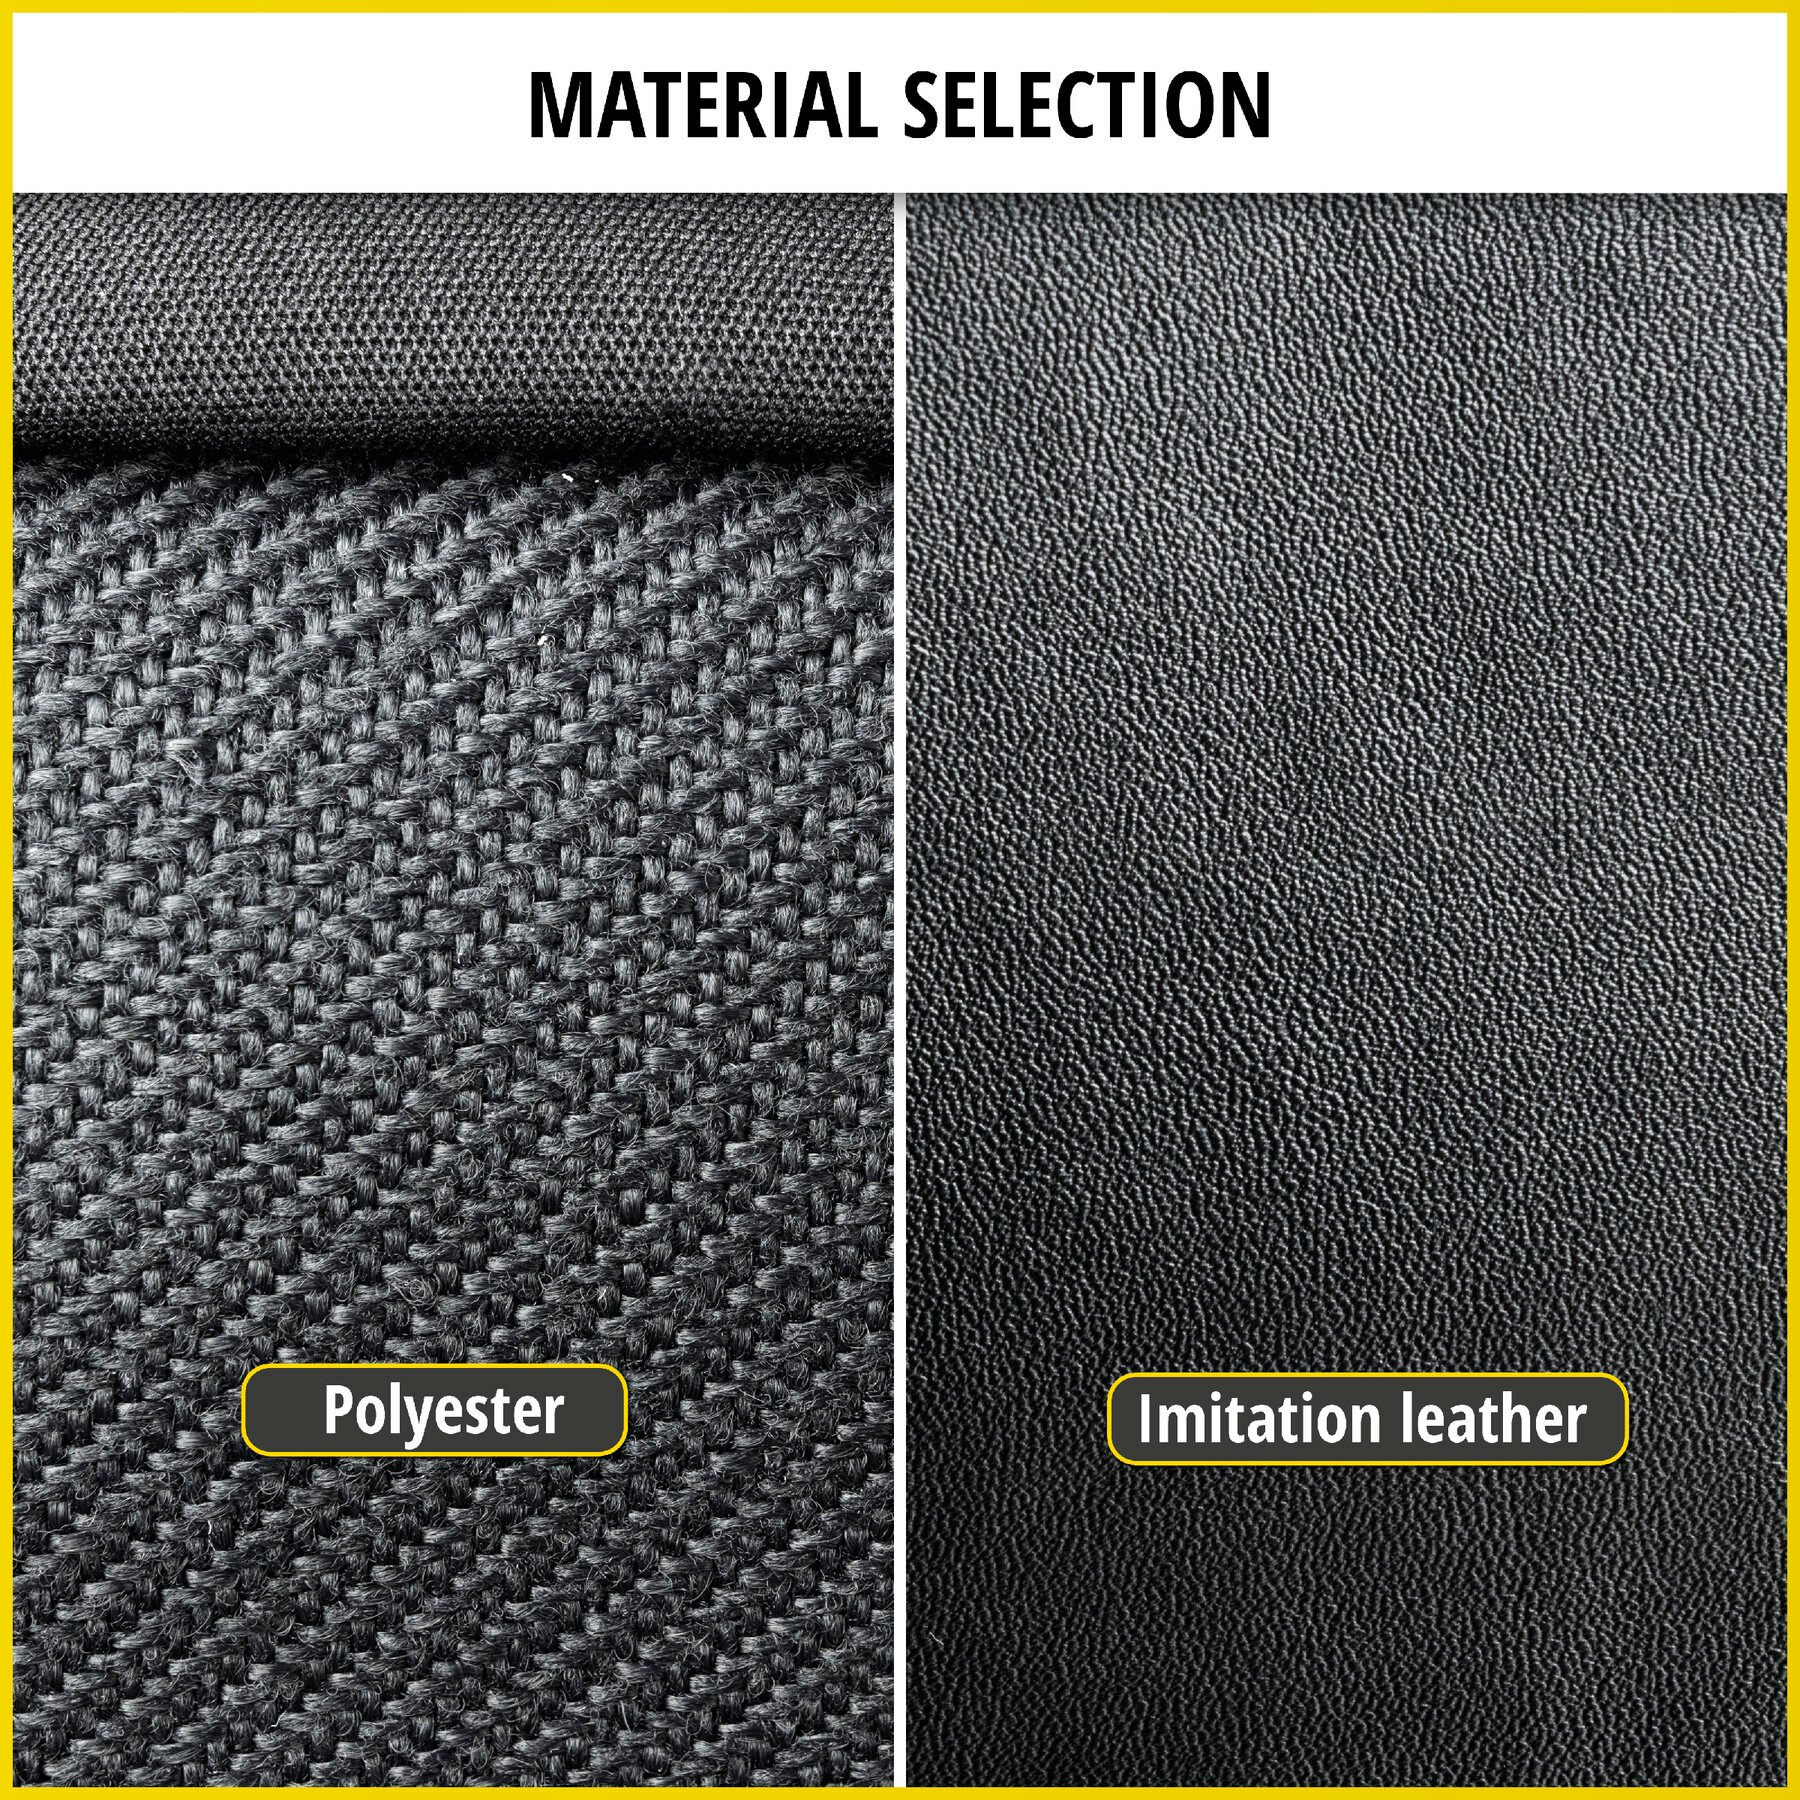 Seat cover made of imitation leather for Mercedes-Benz Viano/Vito, 2 single seat covers without armrest